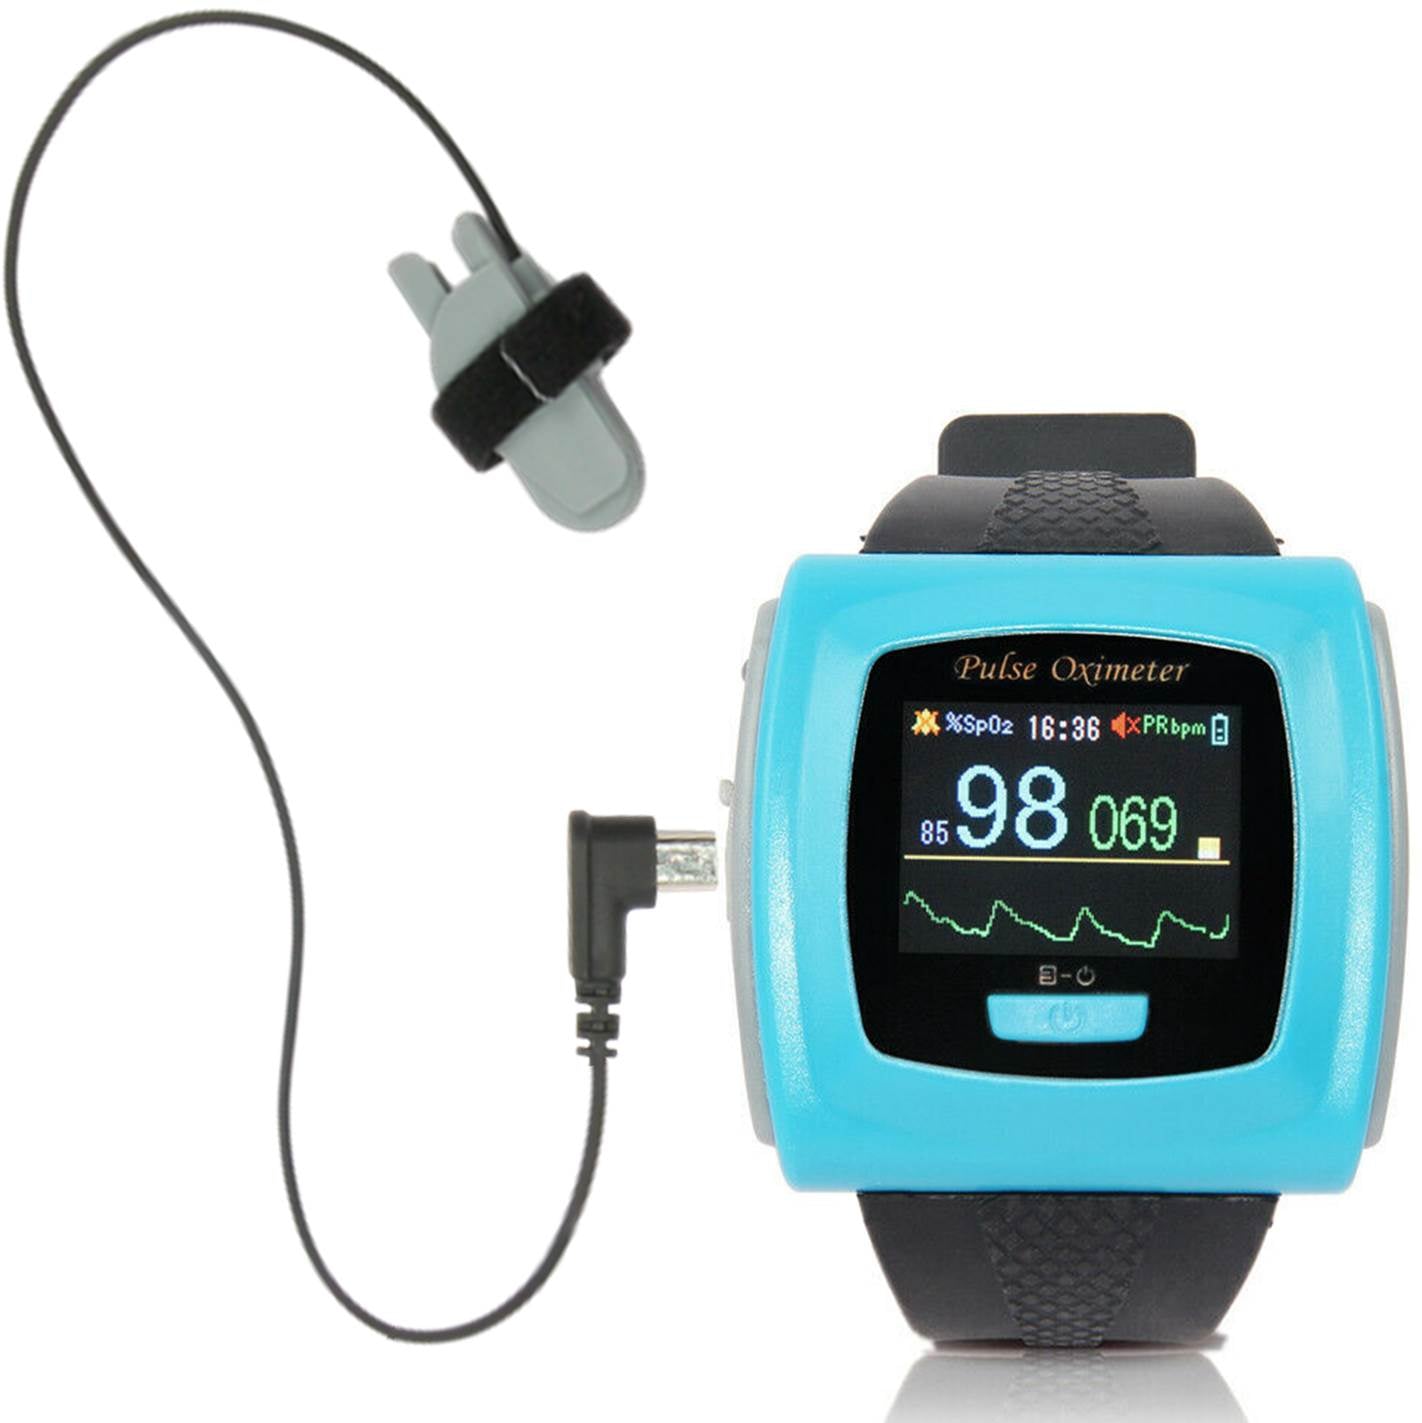 Overnight Pulse Oximeter – wrist worn to measure blood oxygen saturation and heart rate